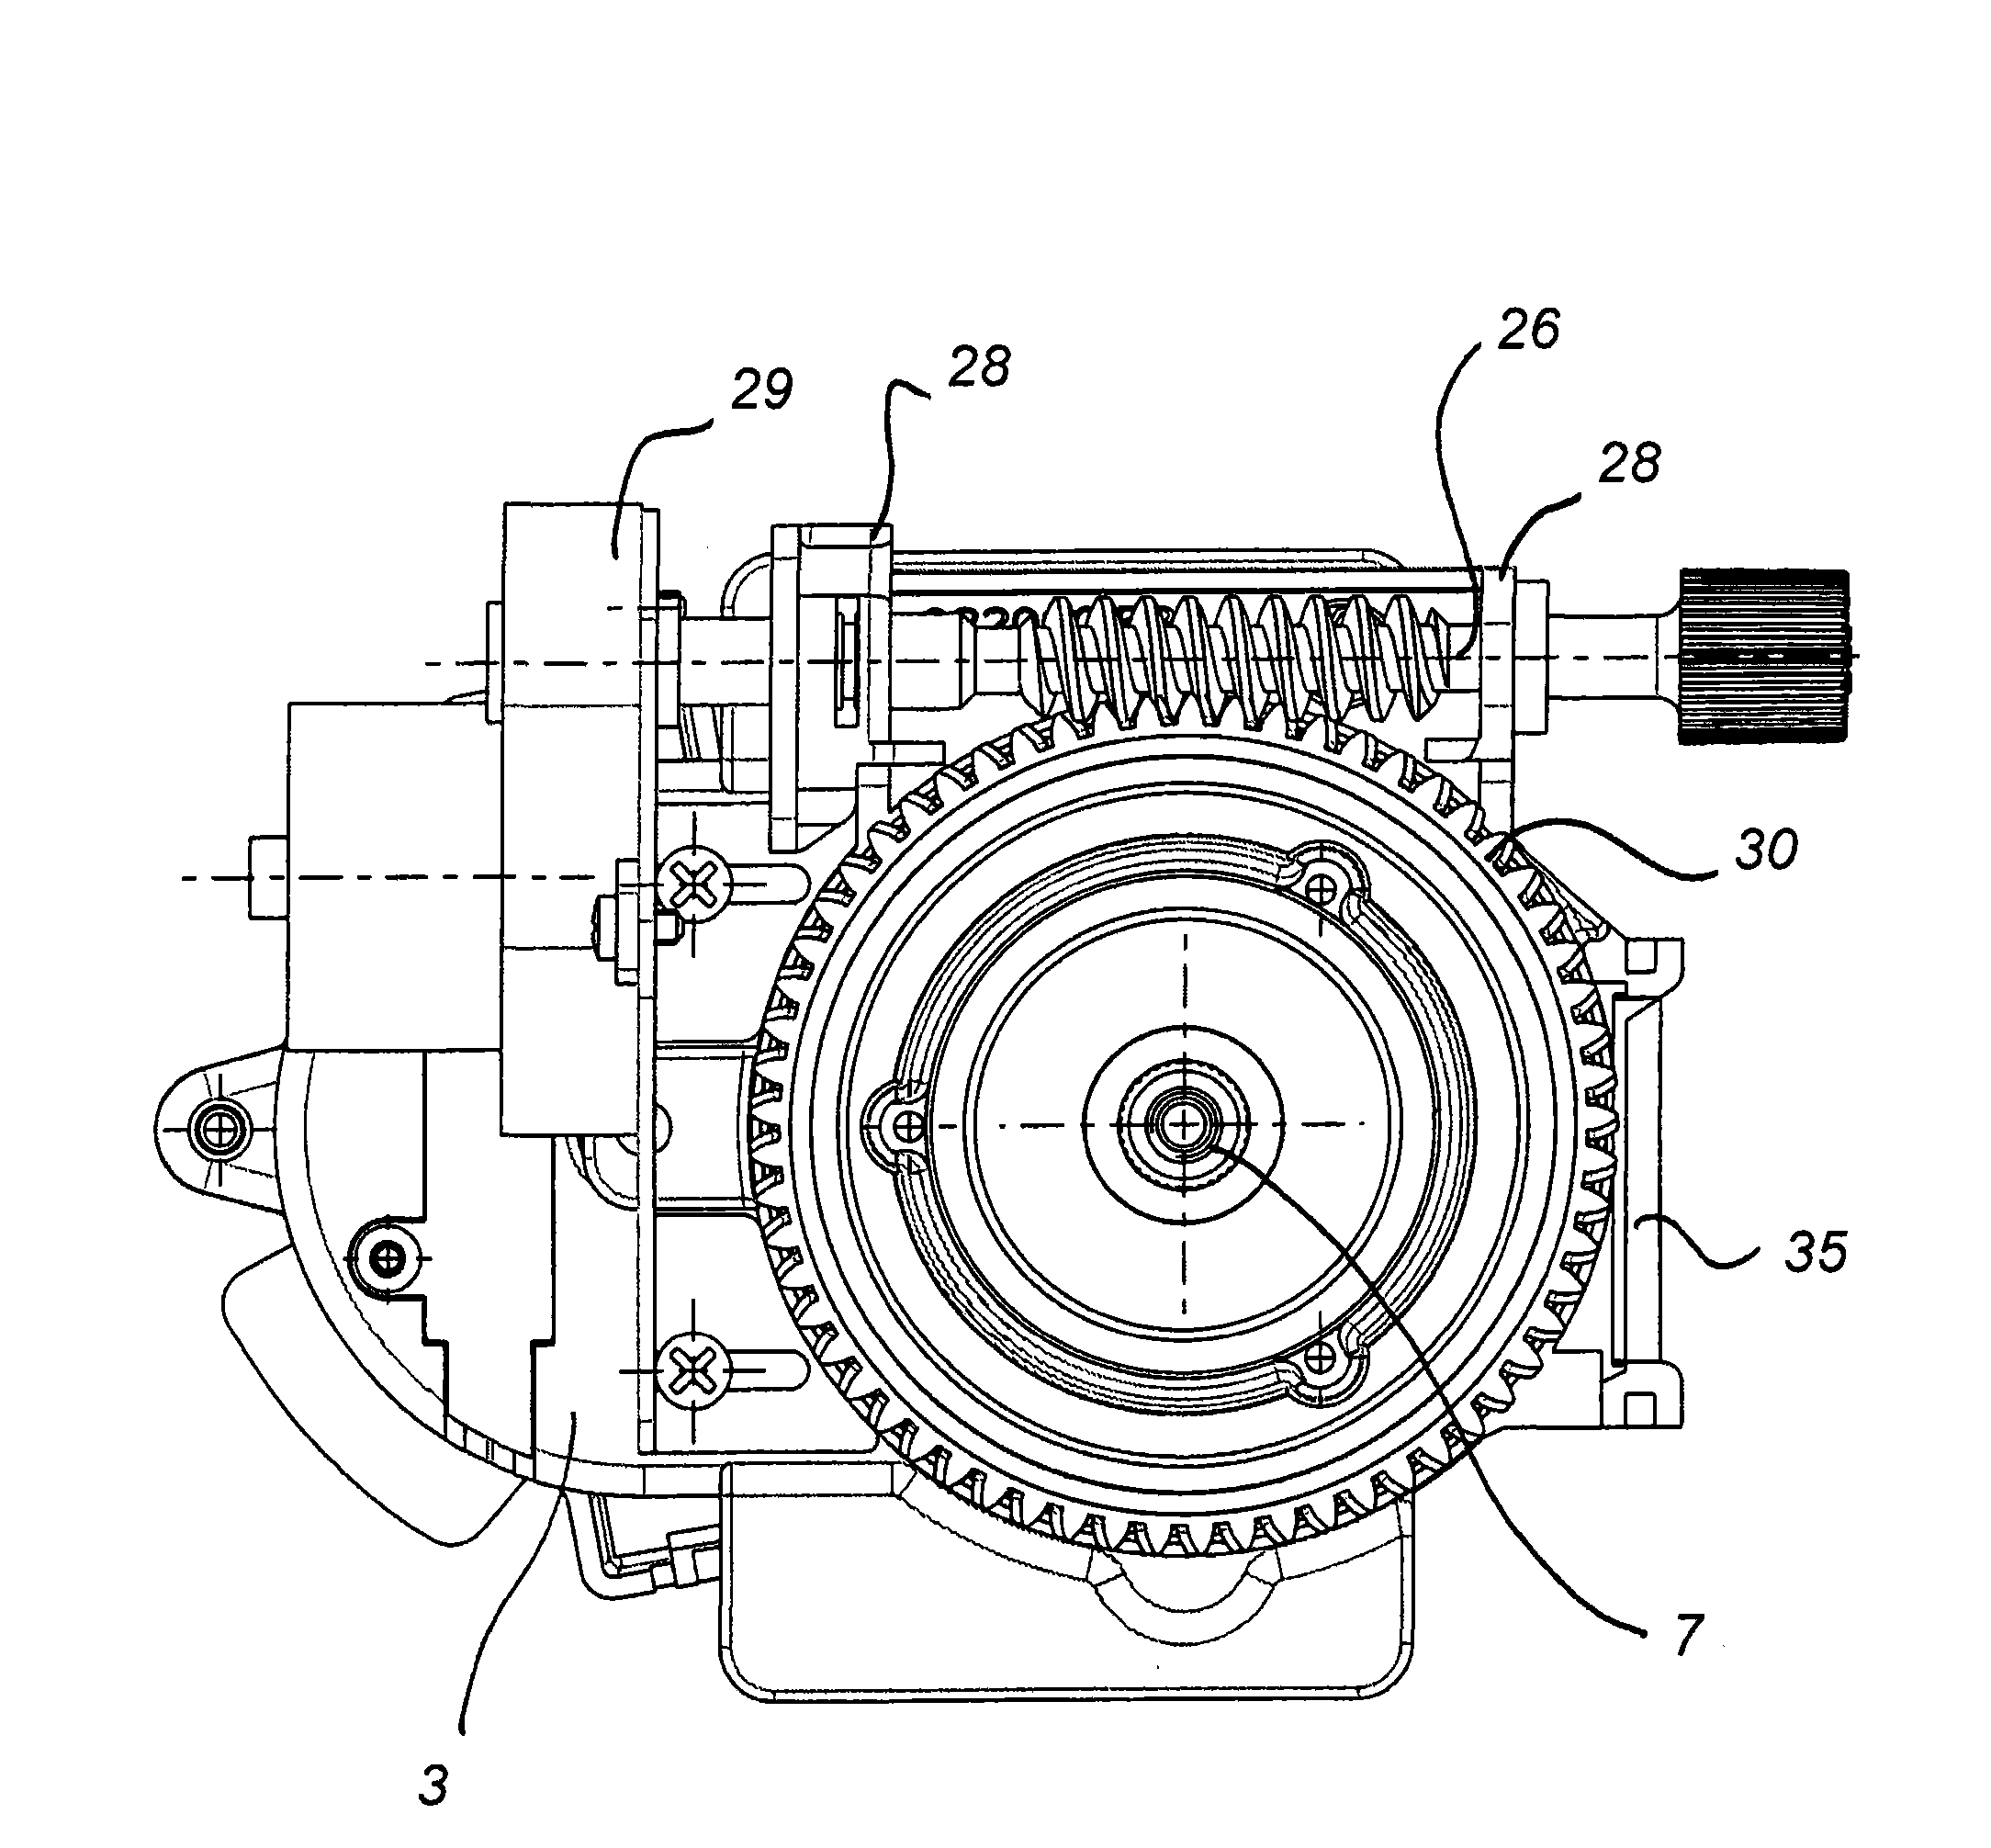 Device for grinding coffee or other alimentary substances